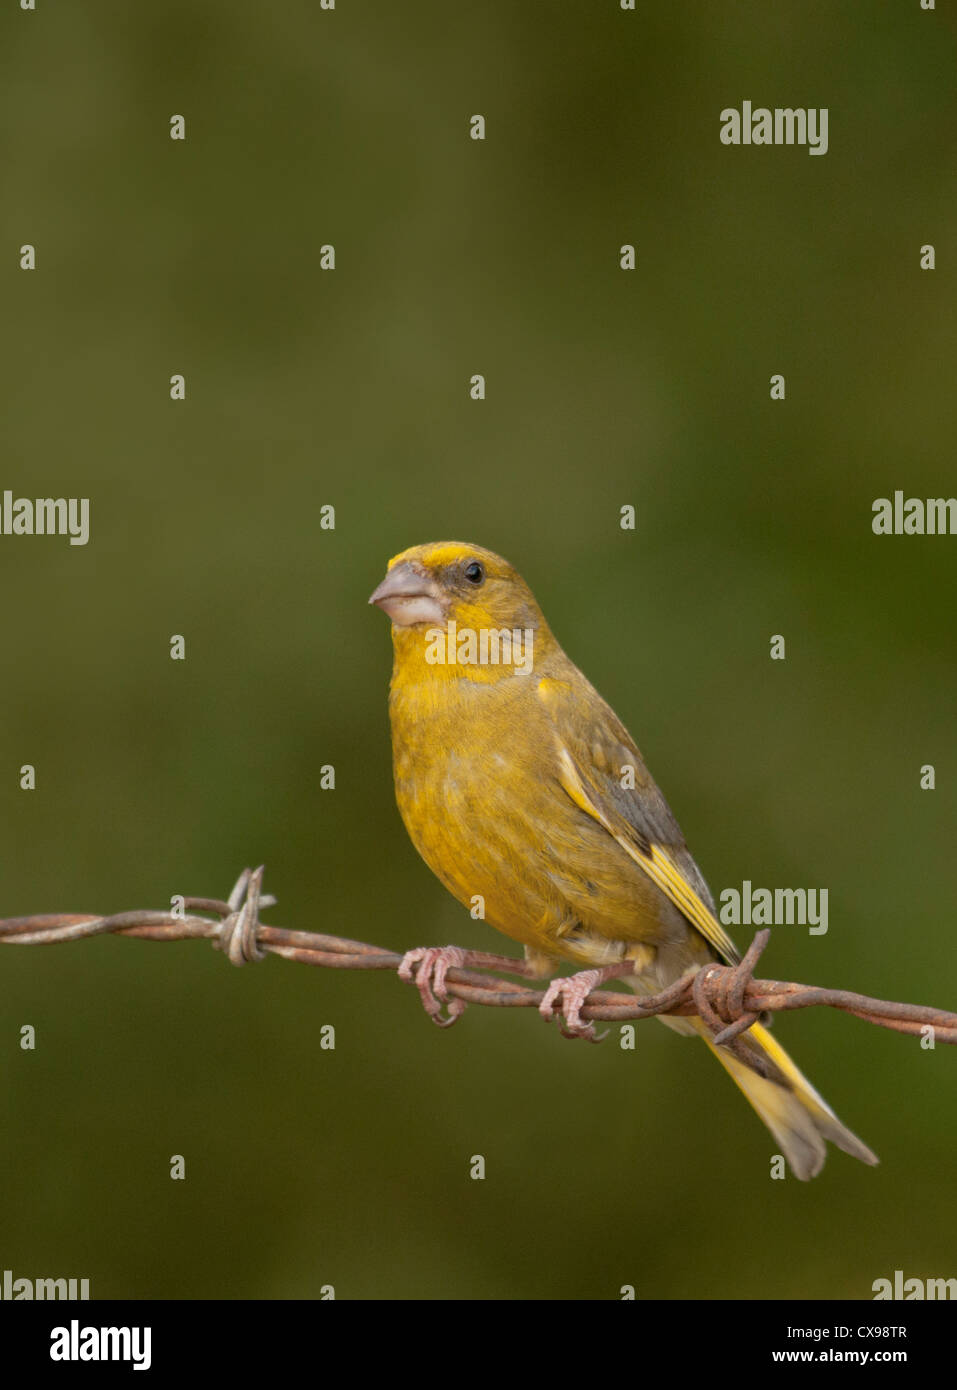 Green Finch, sitting on barbed wire fence, Essex countryside. Stock Photo